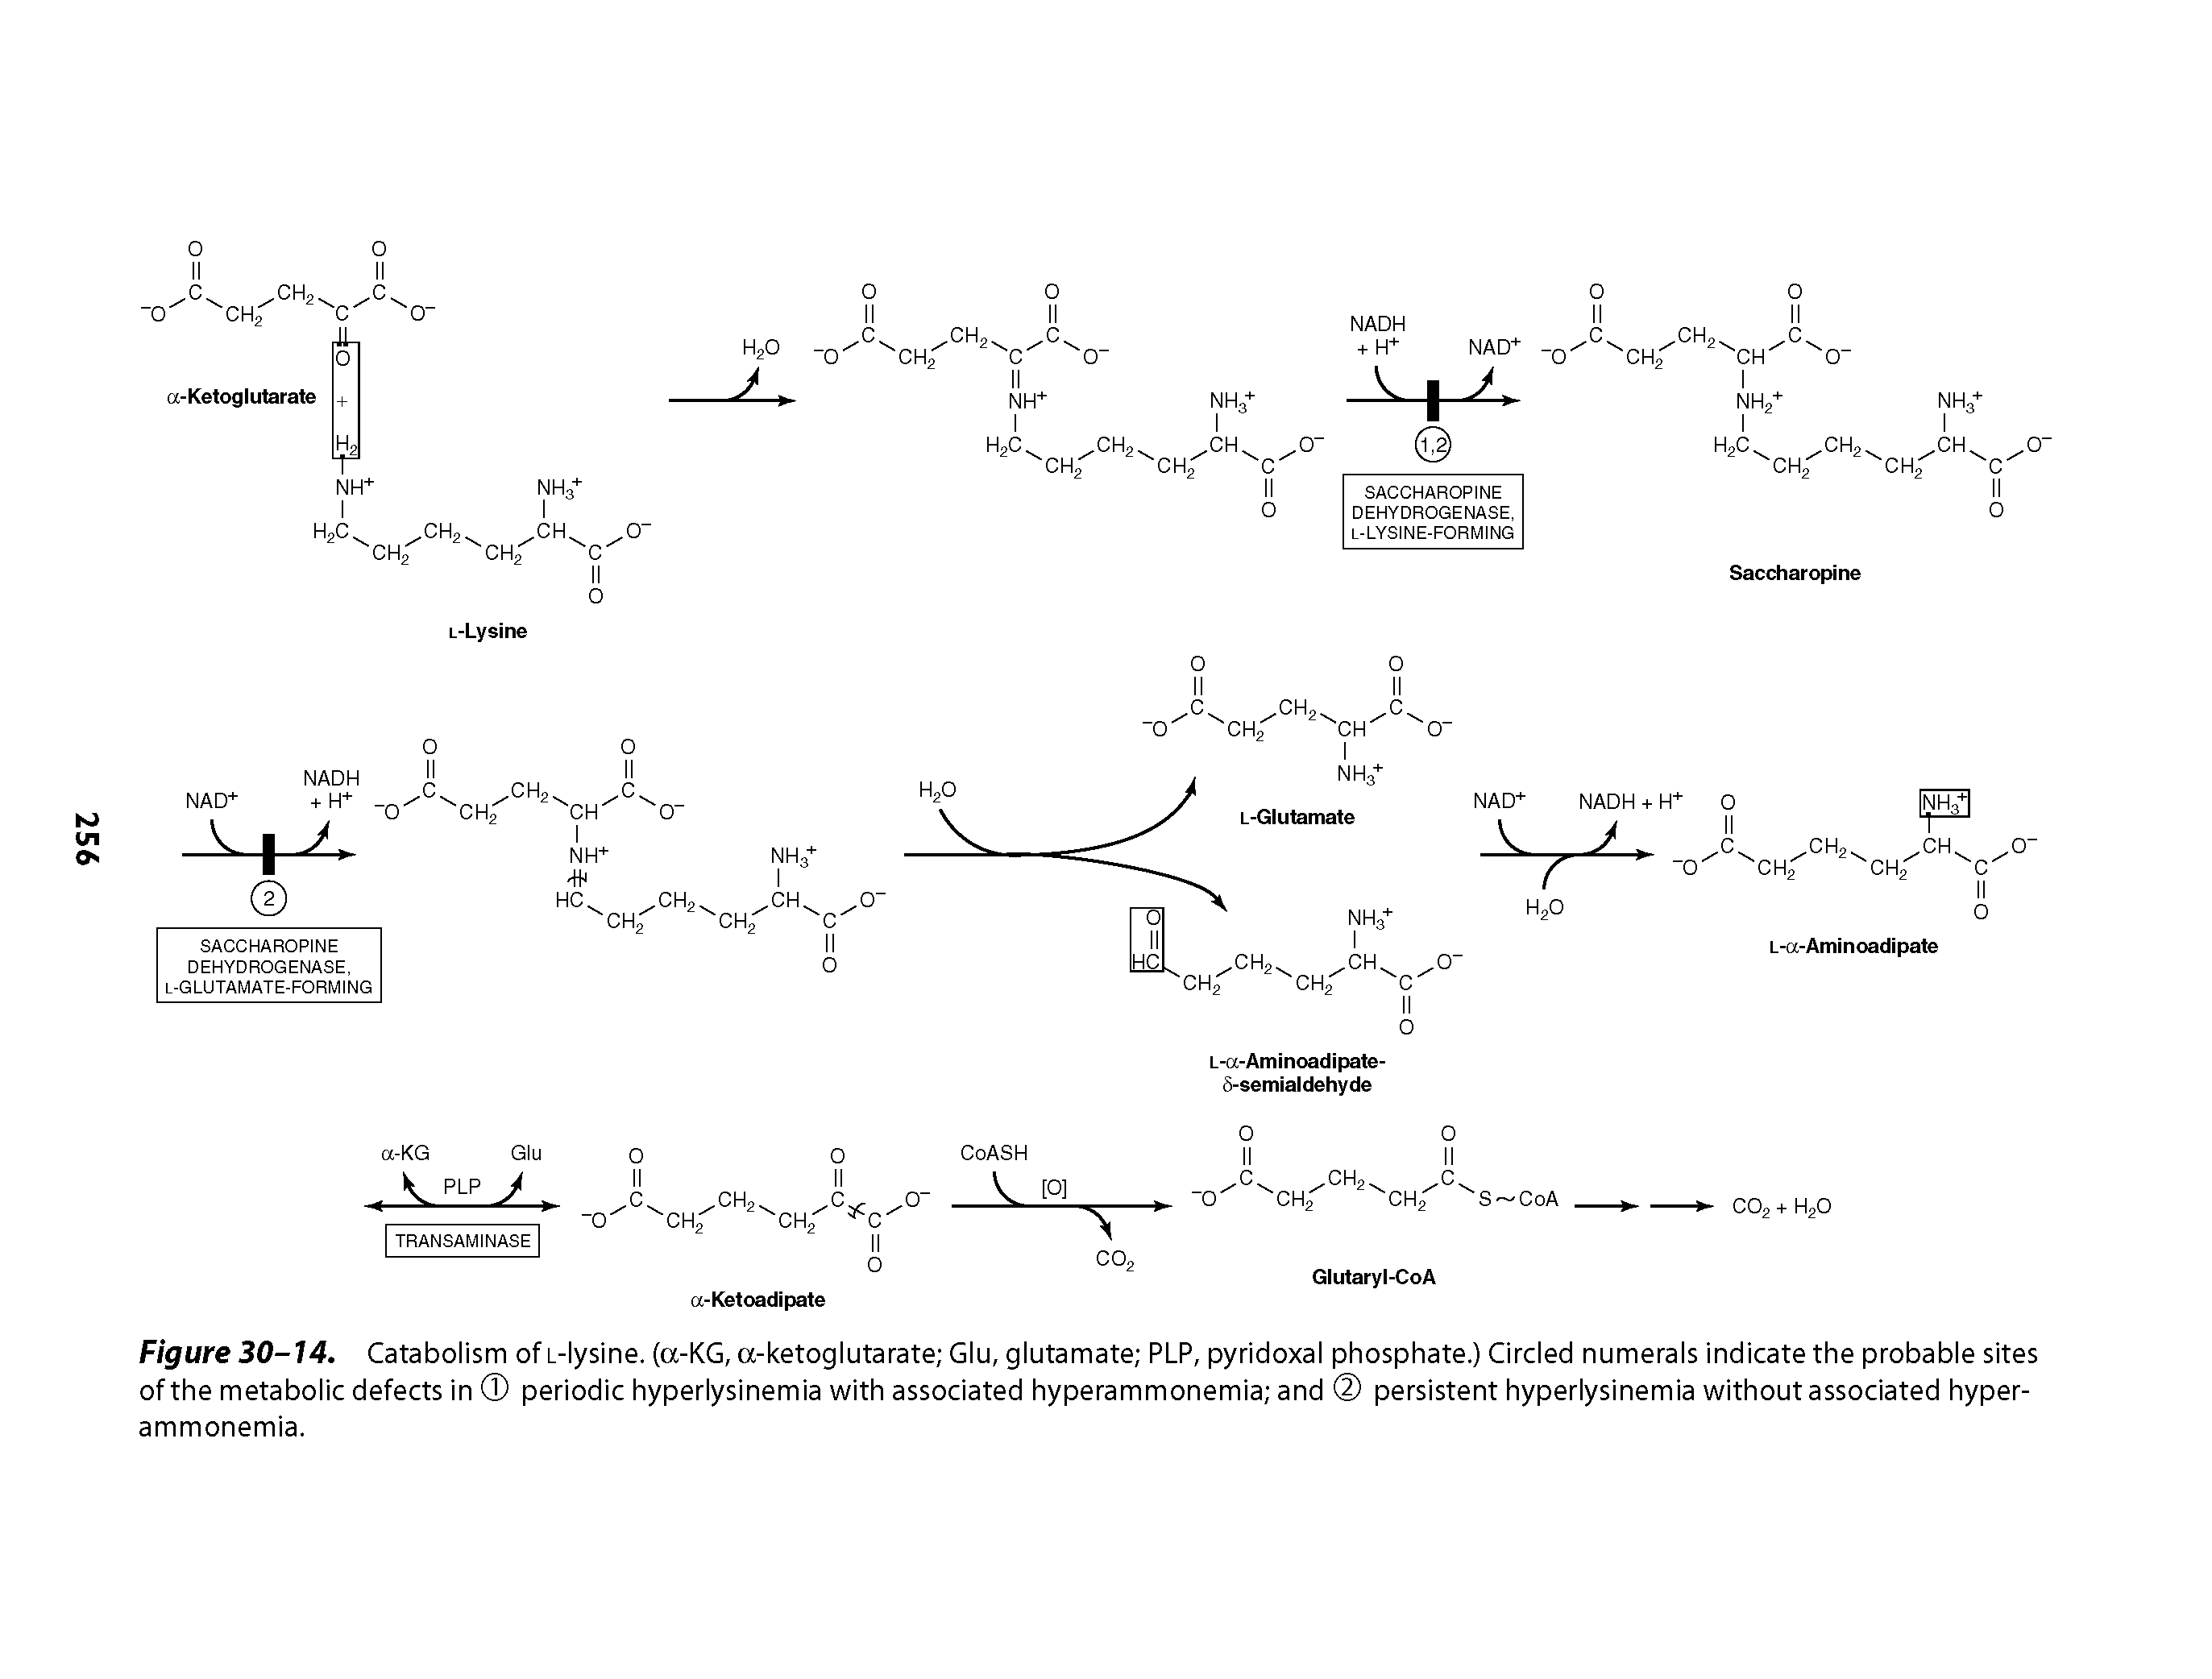 Figure 30-14. Catabolism of i-lysine. (a-KG, a-ketoglutarate Glu, glutamate PLP, pyridoxal phosphate.) Circled numerals indicate the probable sites of the metabolic defects in periodic hyperlysinemia with associated hyperammonemia and persistent hyperlysinemia without associated hyperammonemia.